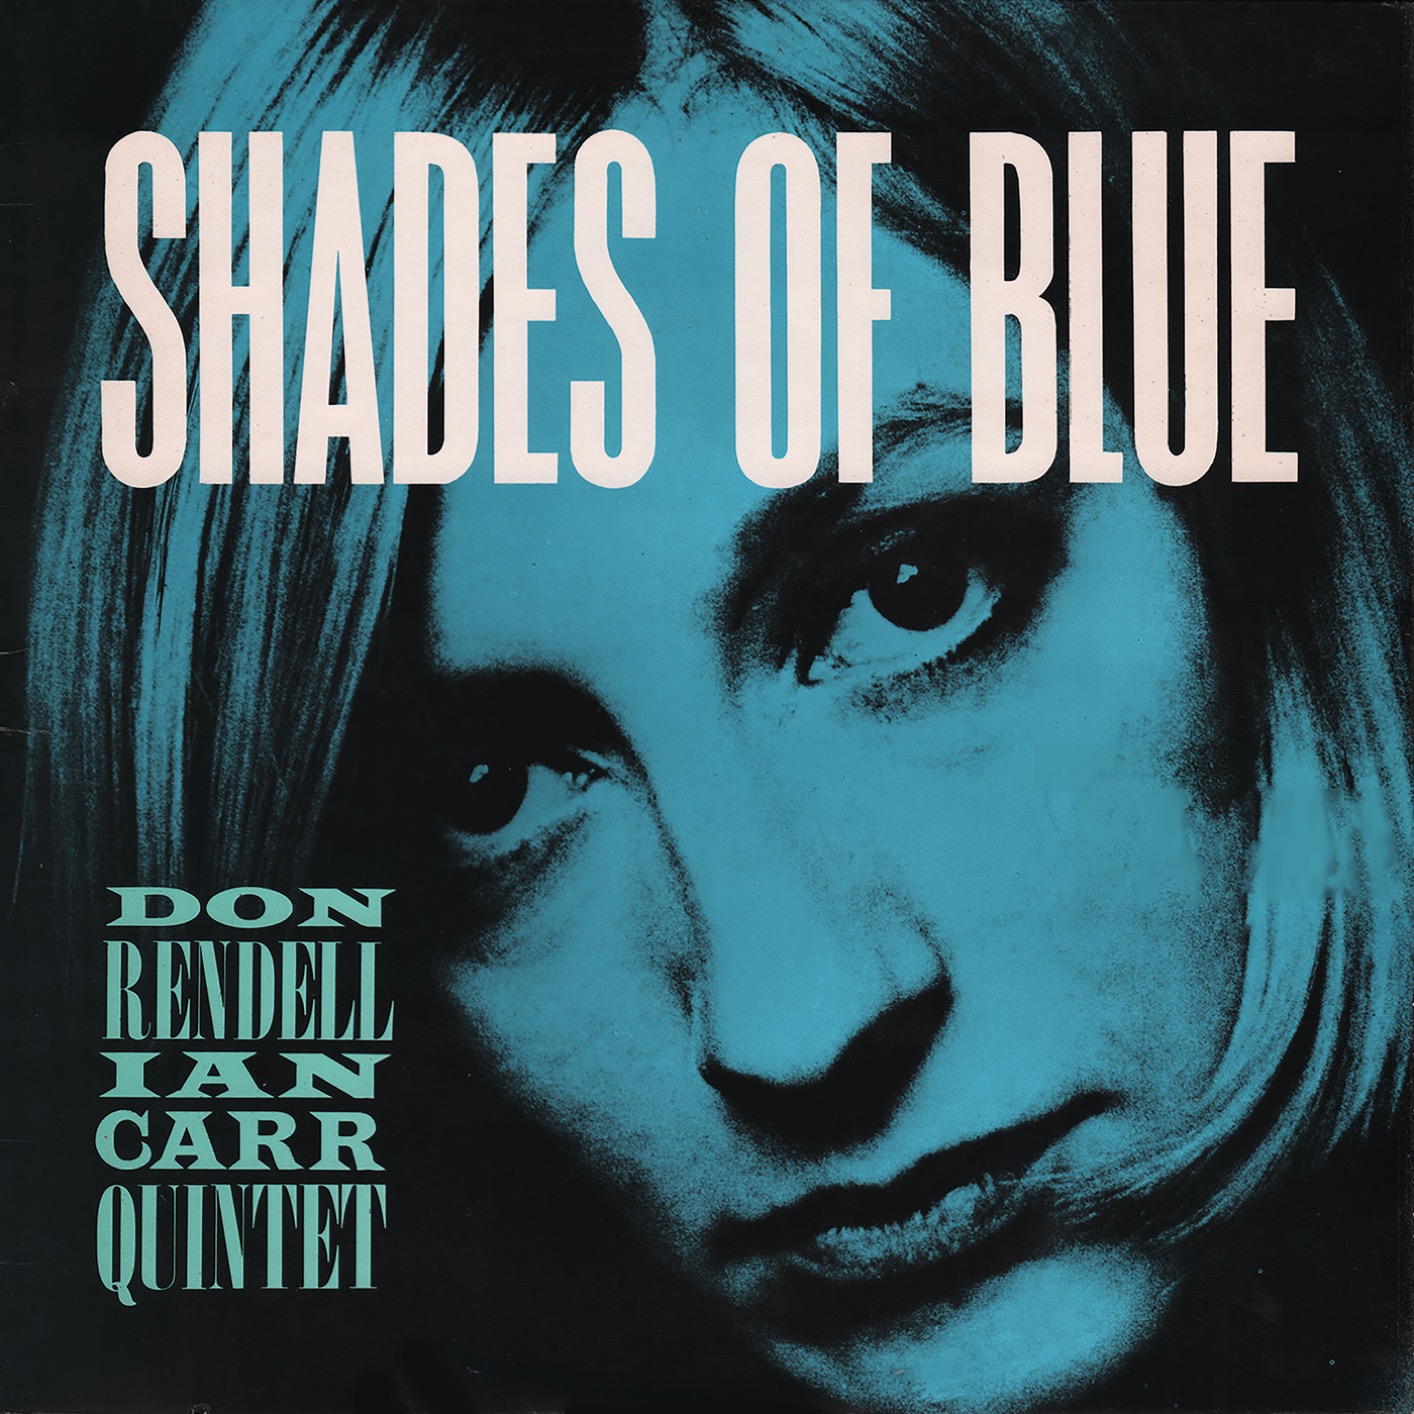 The Don Rendell / Ian Carr Quintet – Shades Of Blue (1965/2018) [FLAC 24bit/96kHz]